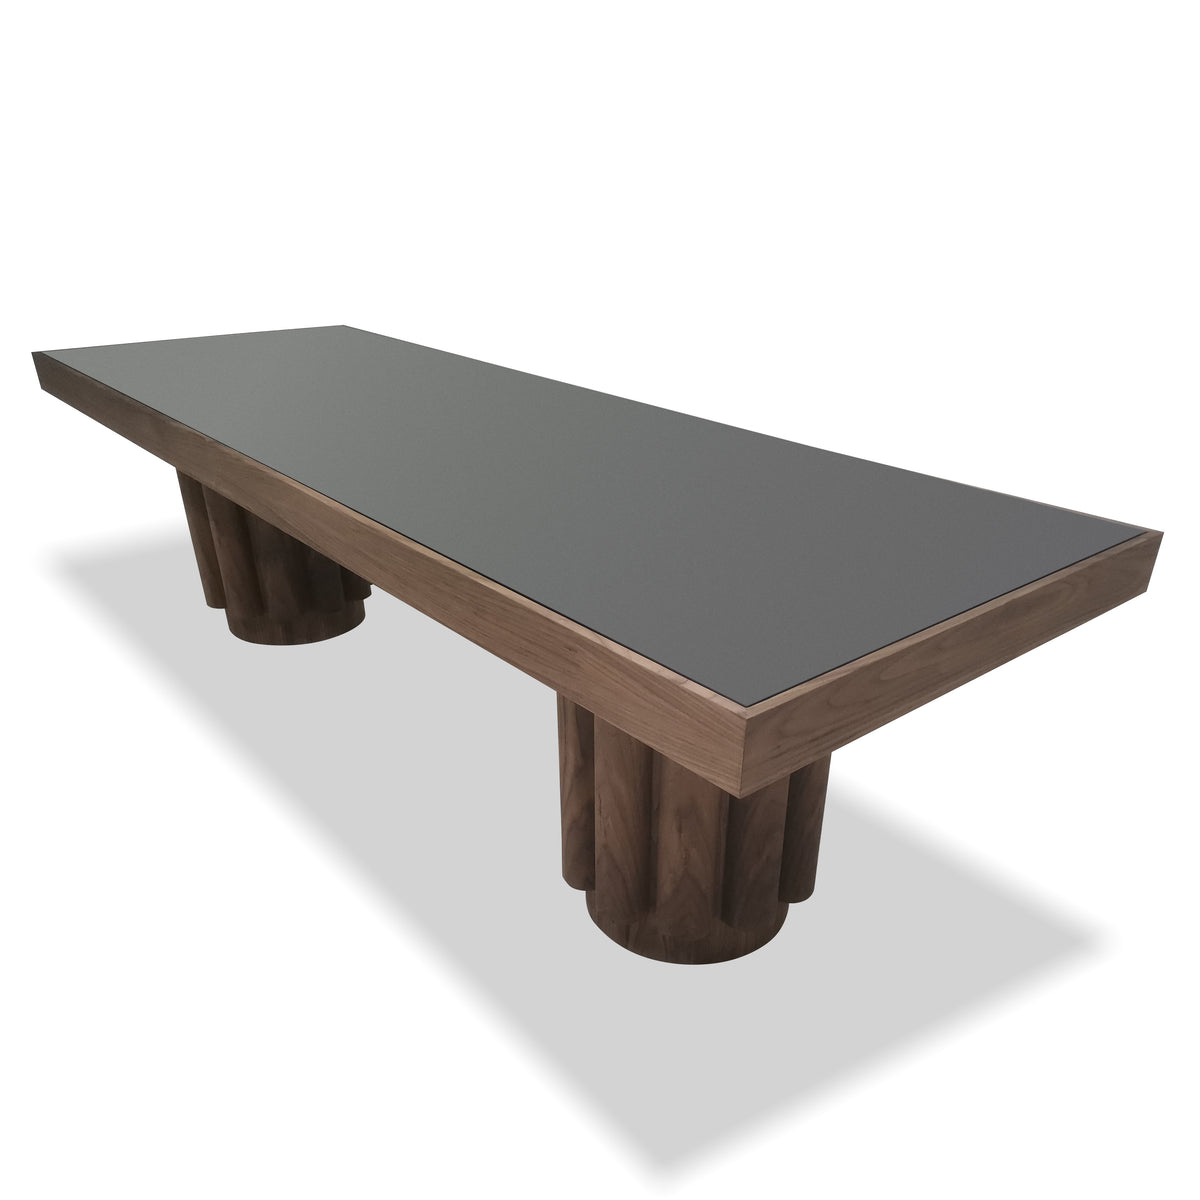 Eden Rock Double Pedestal Dining Table with Glass Top